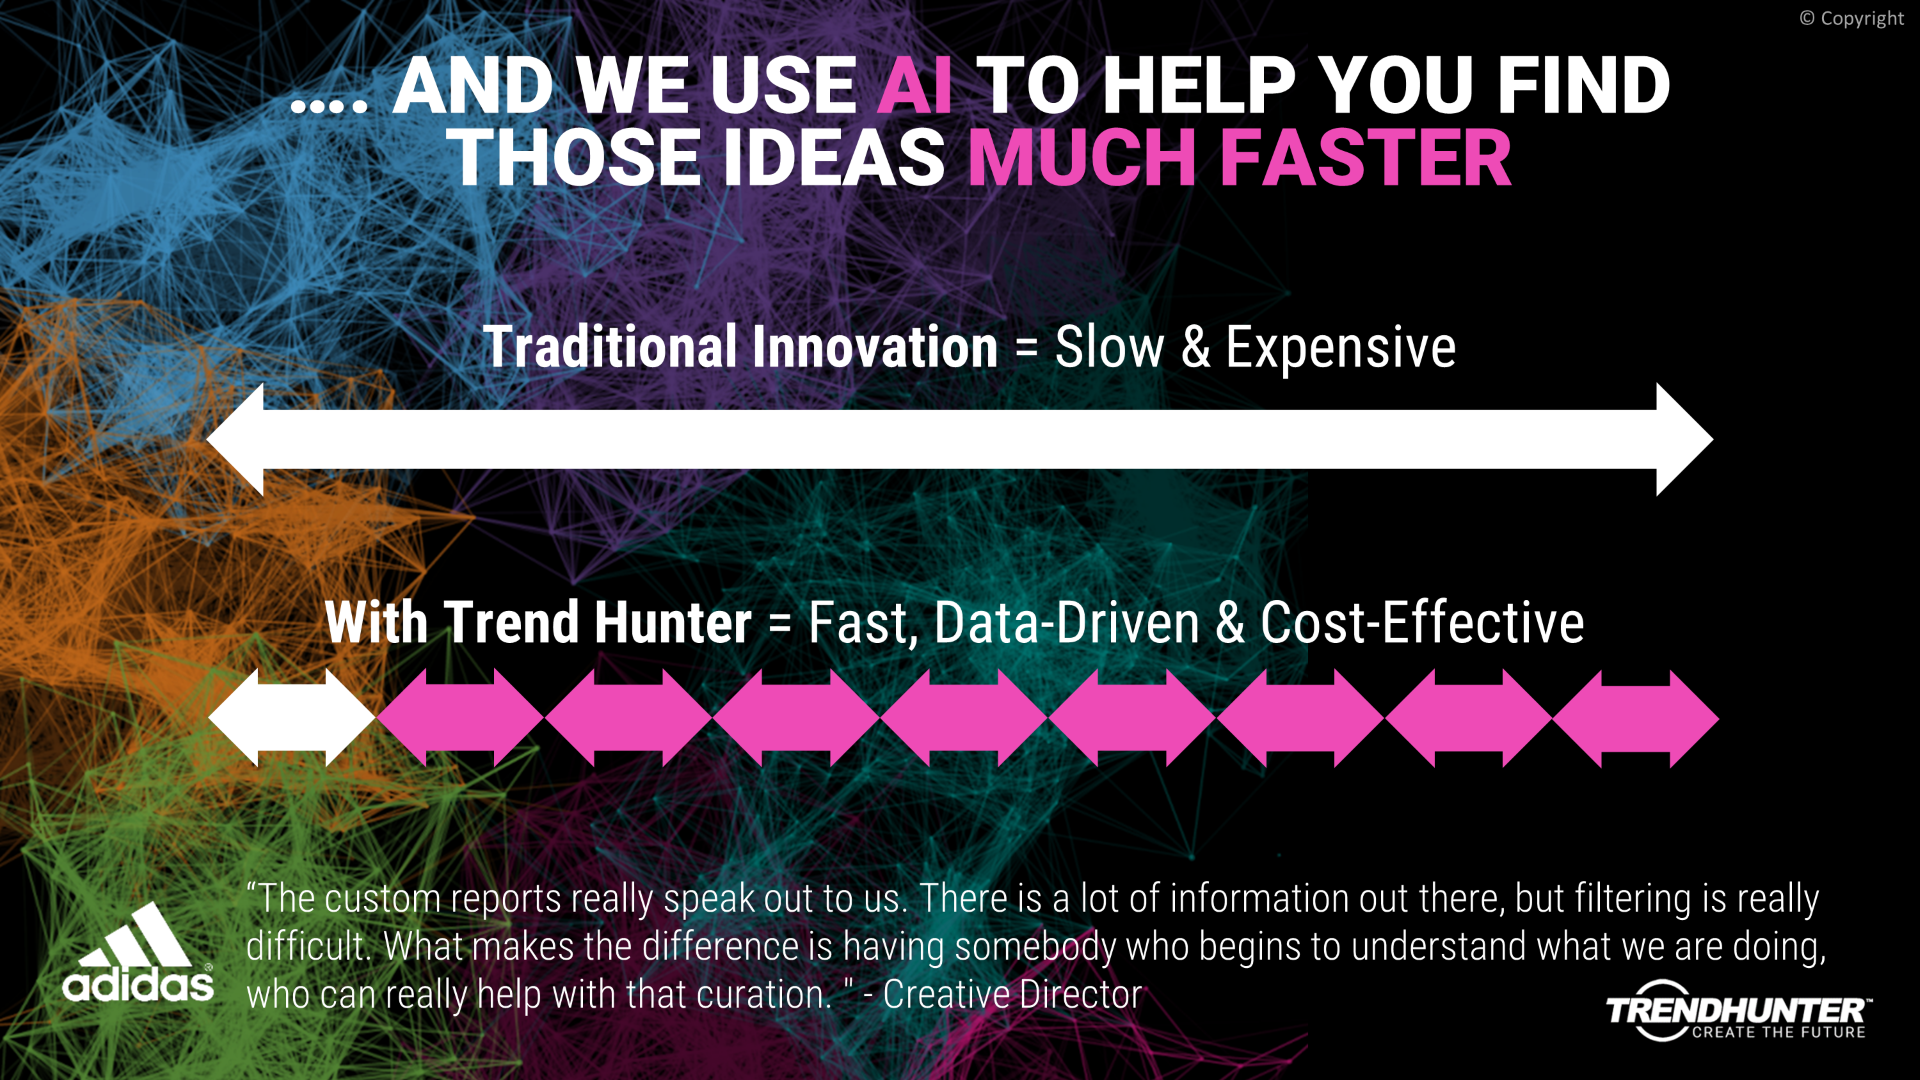 Image Slide: We use AI to help you find ideas faster